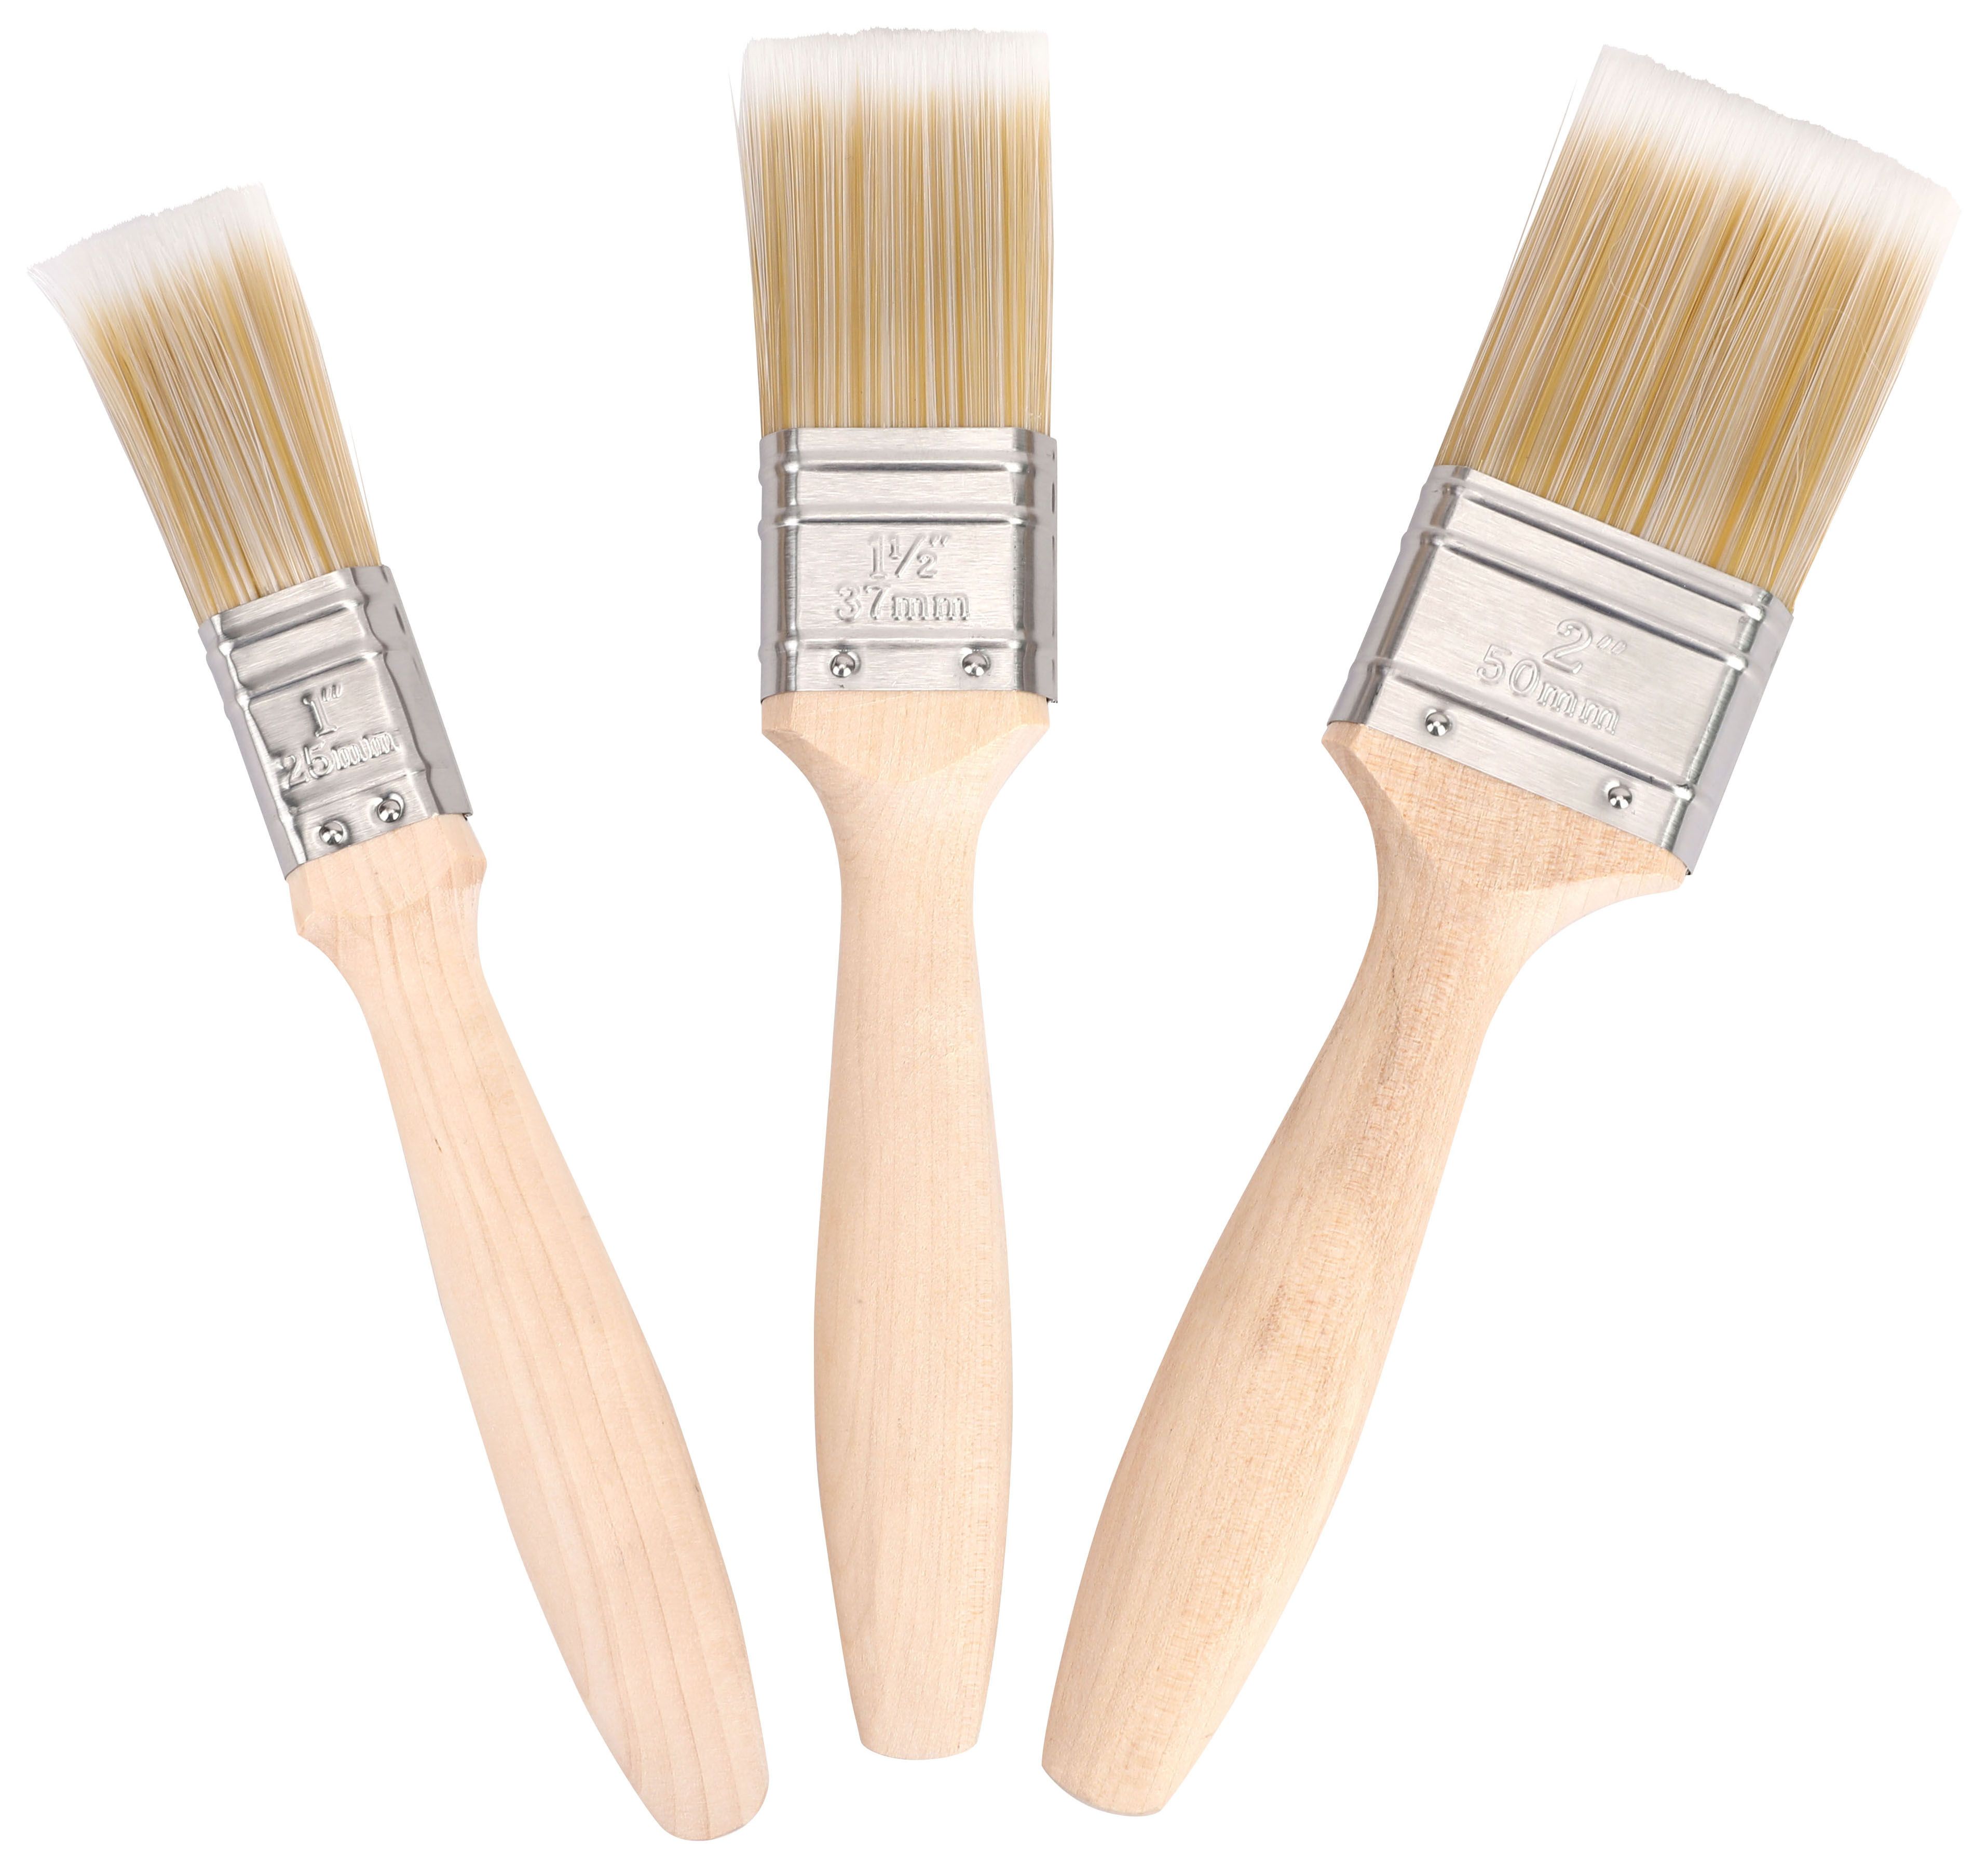 Mastercoat Synthetic Mixed Size Paint Brushes - Pack of 3